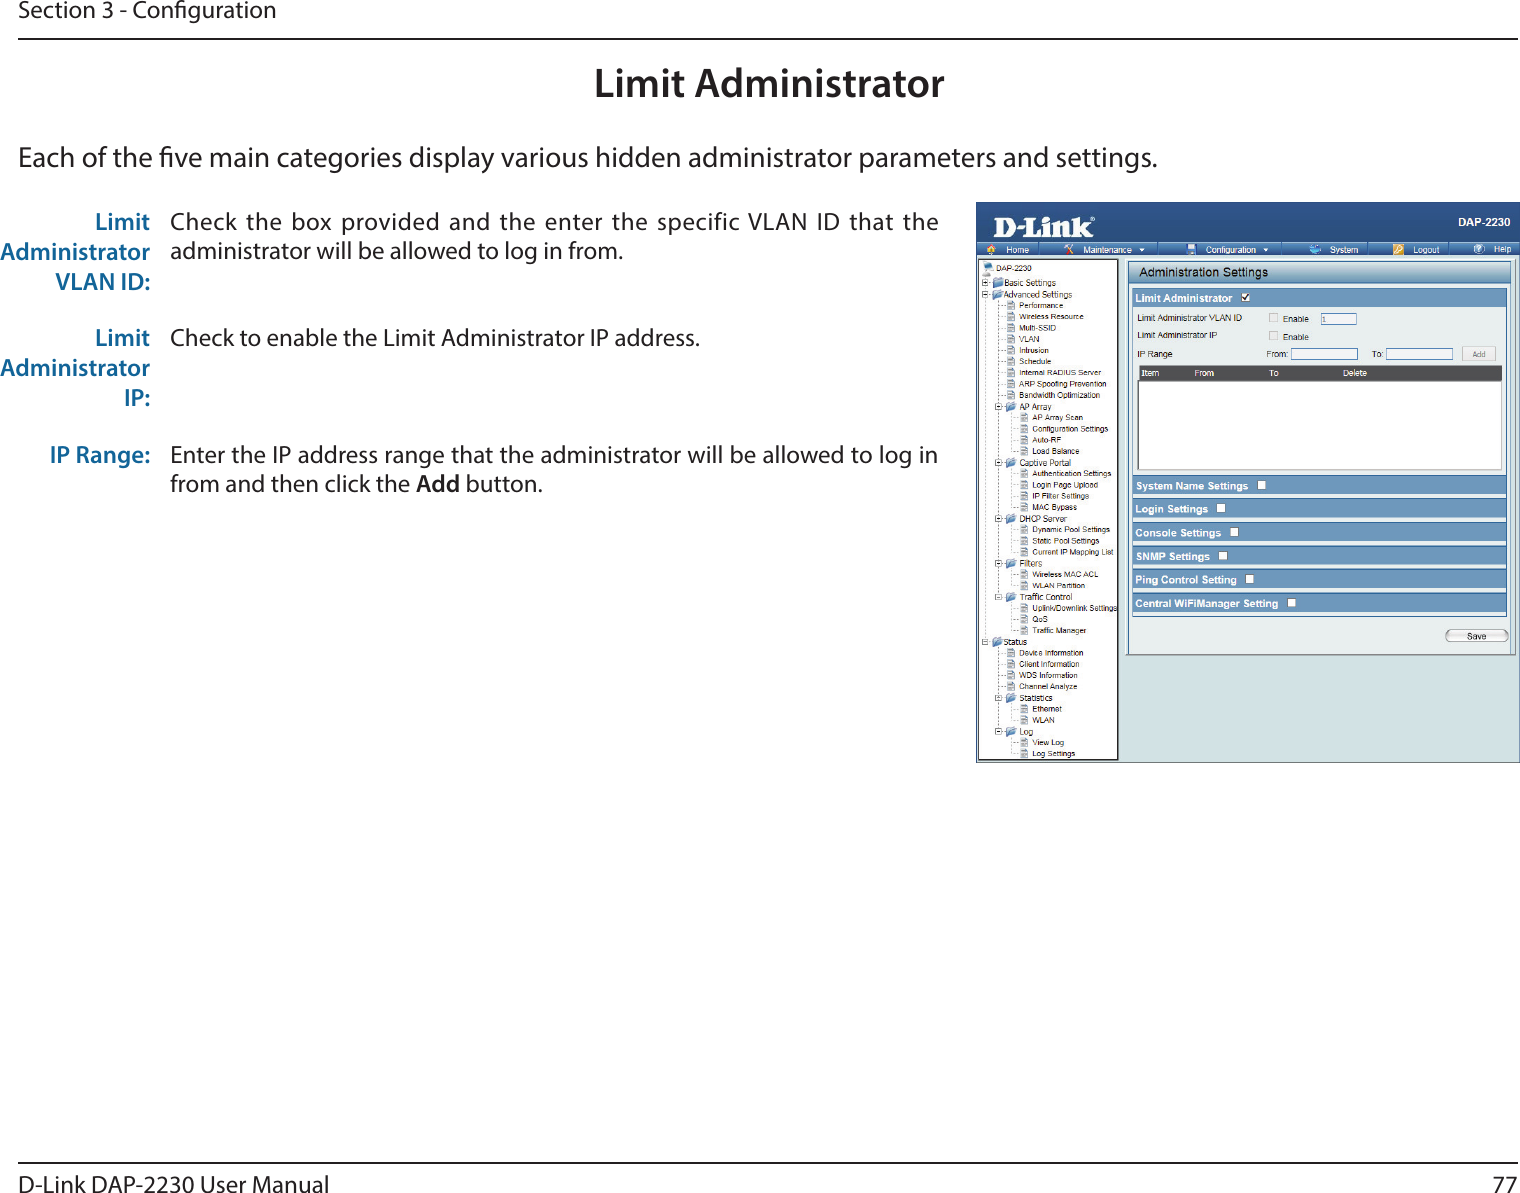 77D-Link DAP-2230 User ManualSection 3 - CongurationLimit AdministratorEach of the ve main categories display various hidden administrator parameters and settings.Limit Administrator VLAN ID:Check the box provided and the enter the specific VLAN ID that the administrator will be allowed to log in from.Limit Administrator IP:Check to enable the Limit Administrator IP address.IP Range: Enter the IP address range that the administrator will be allowed to log in from and then click the Add button.